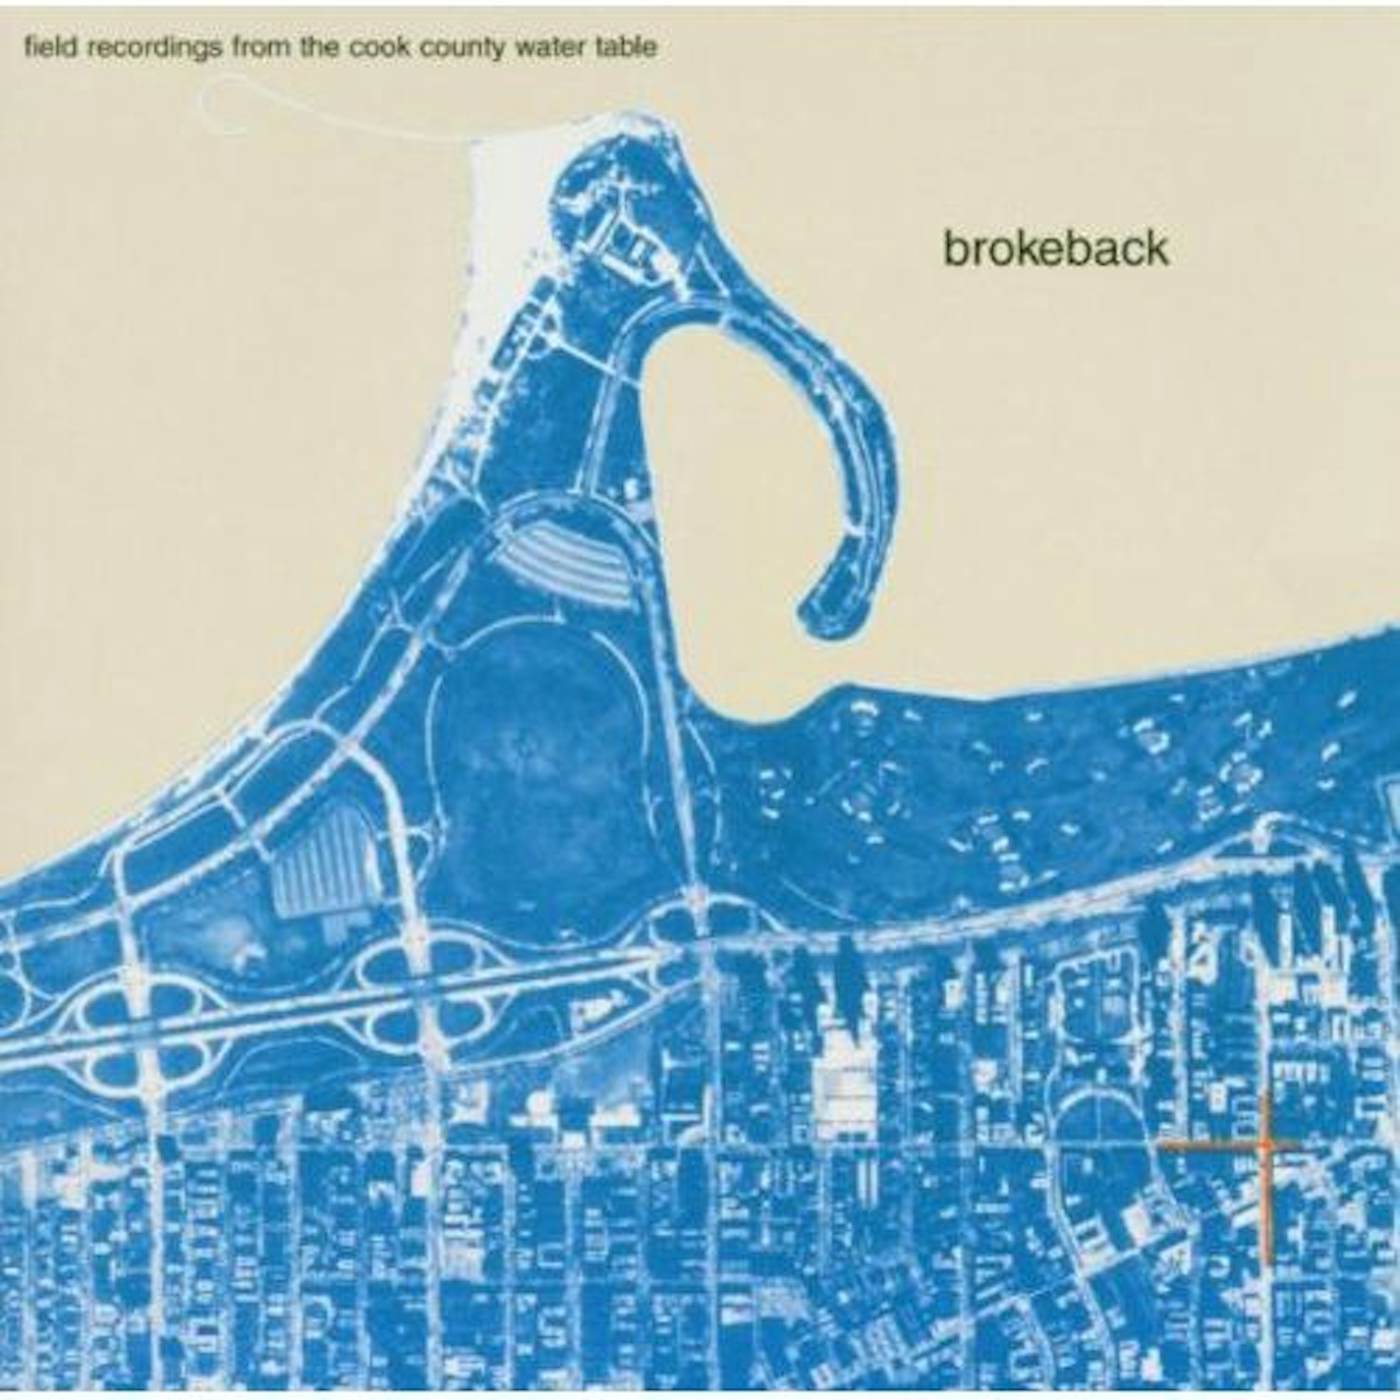 Brokeback Field Recordings from the Cook County Water Table Vinyl Record